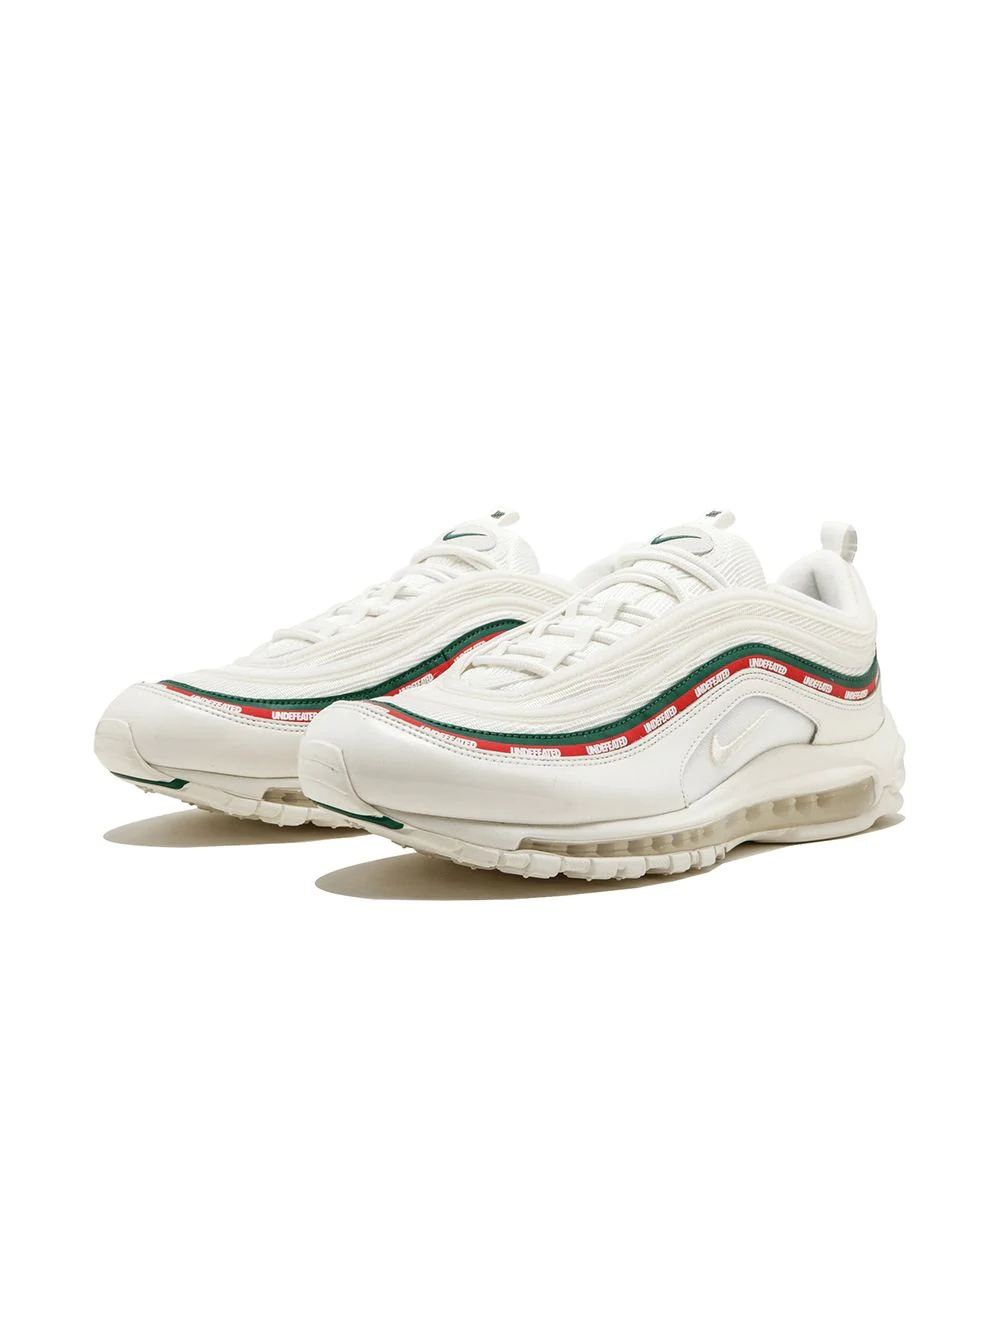 x Undefeated Air Max 97 OG "White" sneakers - 2